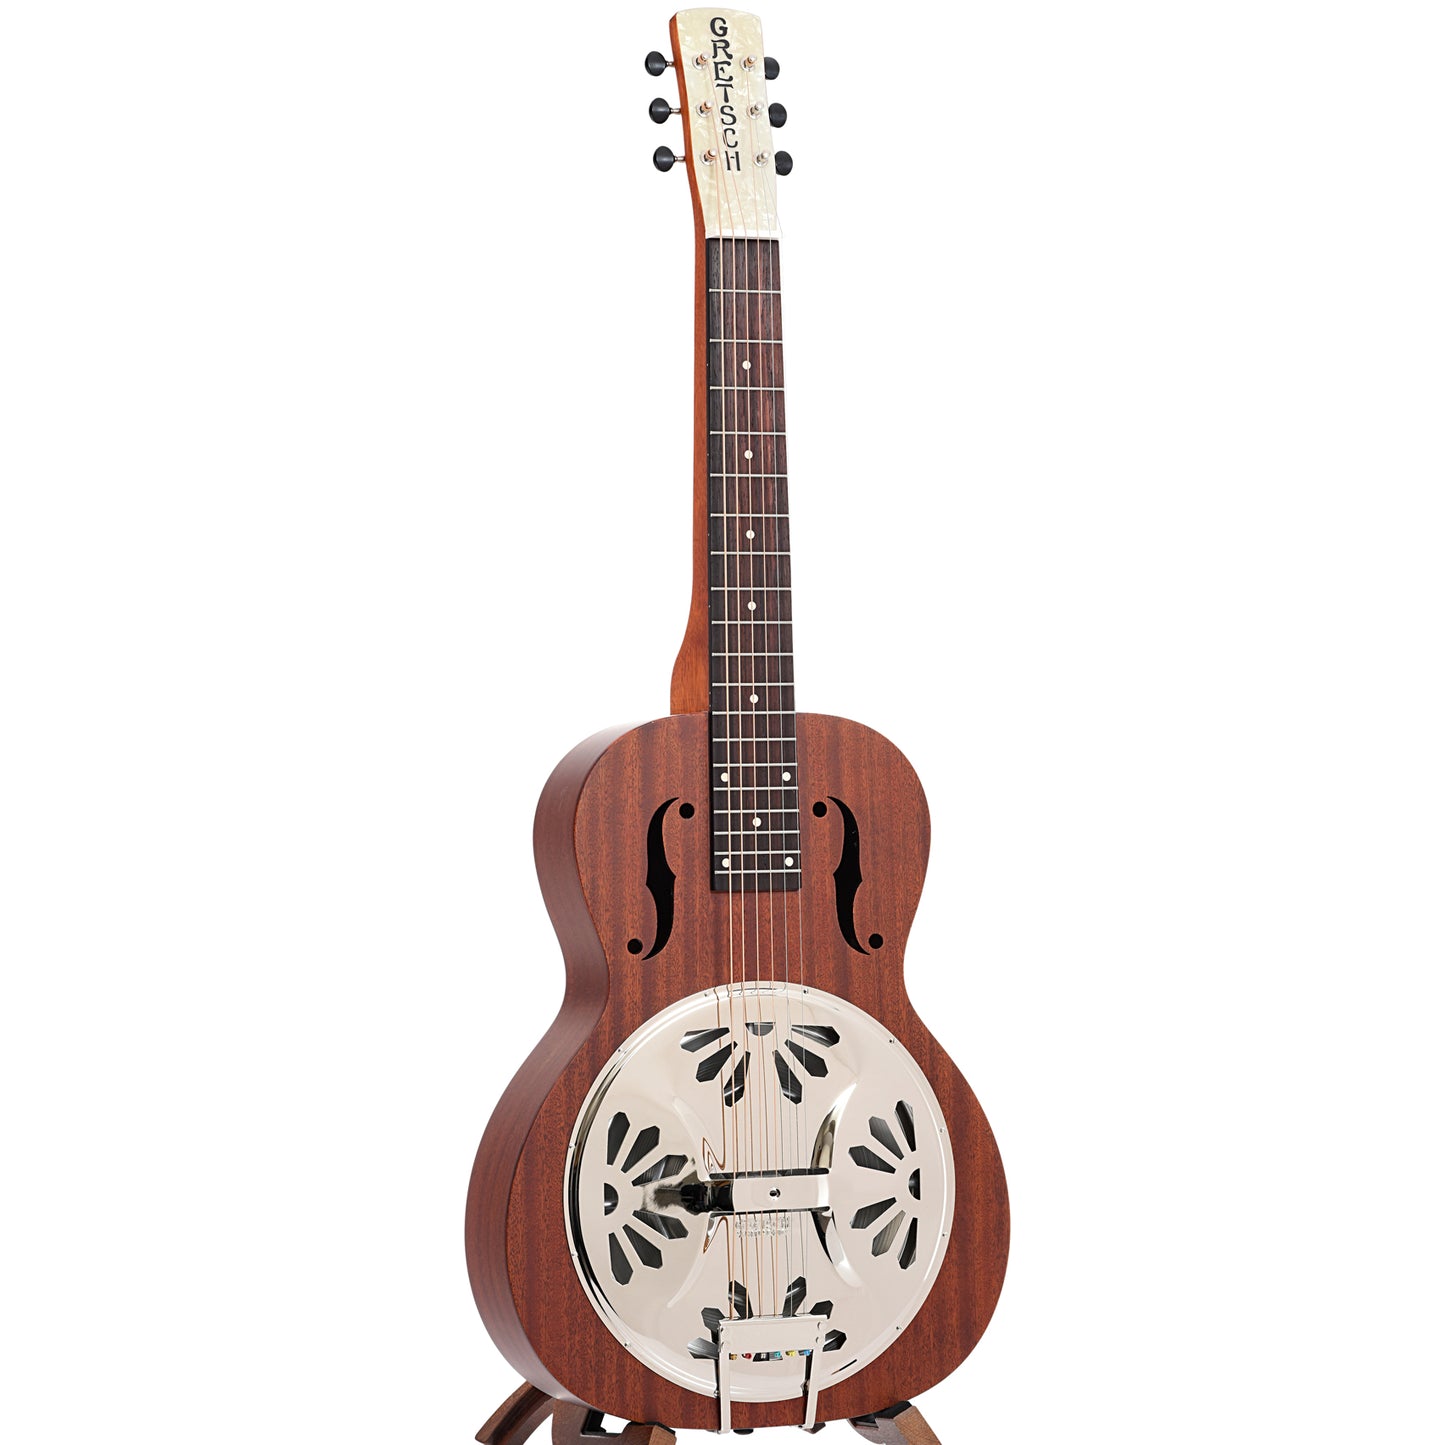 Full front and side of Gretsch Ampli-Sonic G9210 Boxcar Standard Squareneck Resonator Guitar